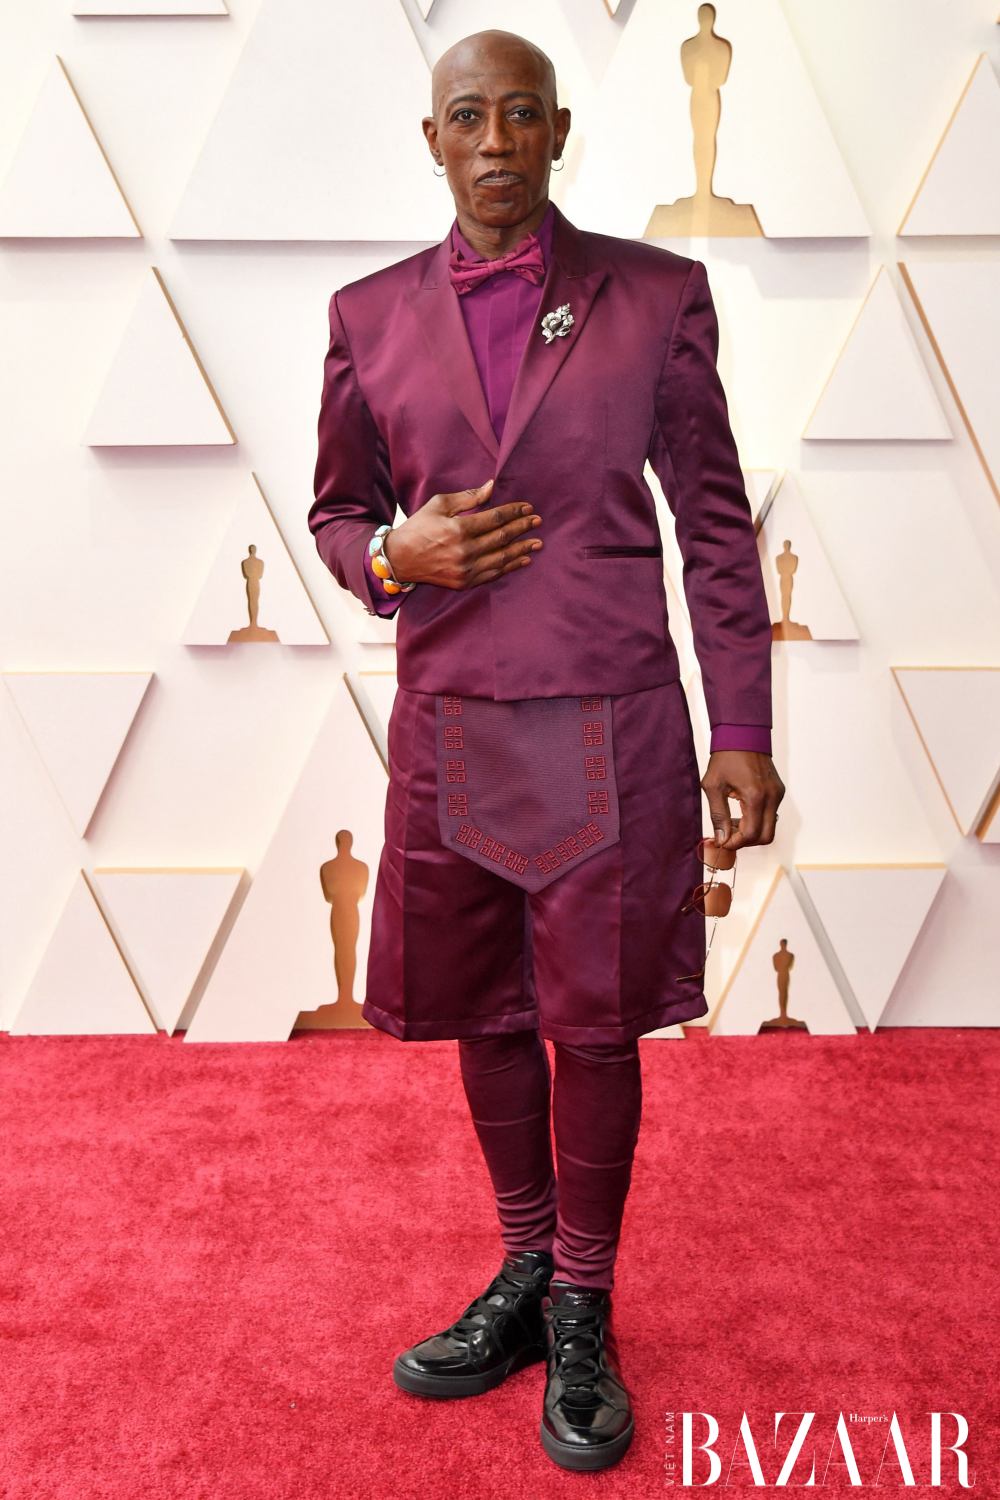 wesley-snipes-BZ-thoi-trang-tham-do-Oscar-2022-red-carpet-best-looks-Givenchy